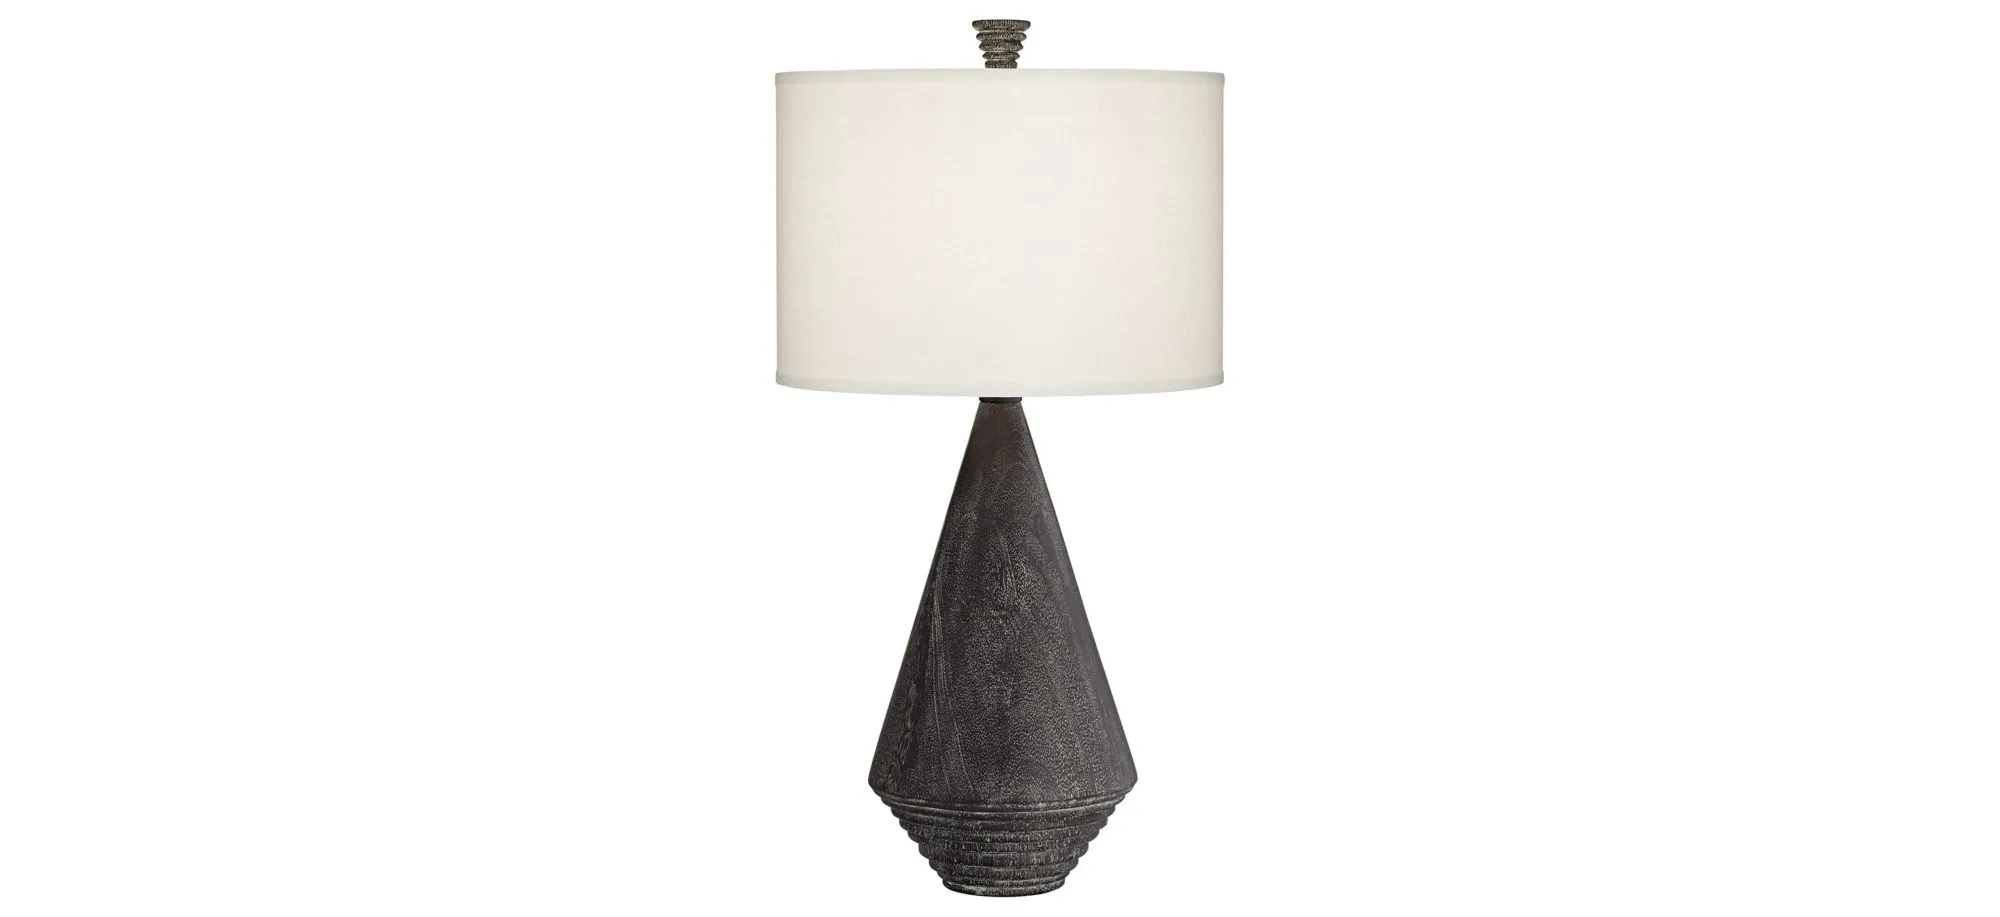 Adelis Table Lamp in Black by Pacific Coast